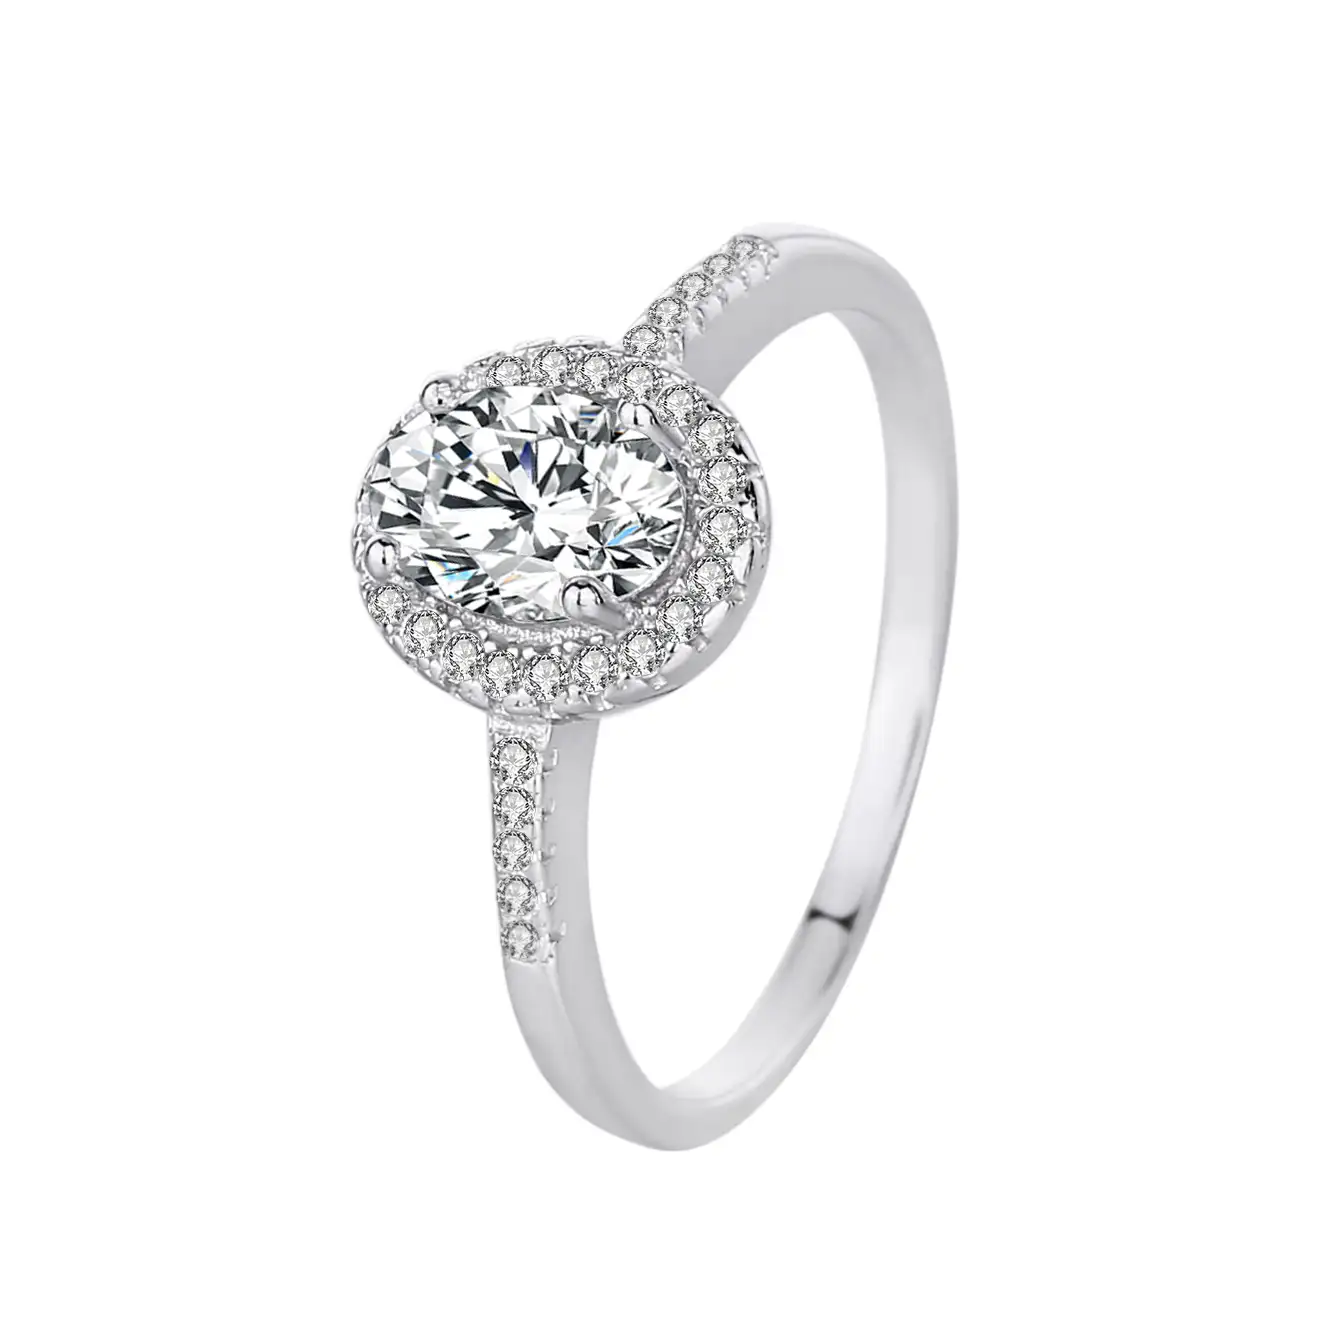 Silver Cubic Zirconia Solitaire Ring 70200045